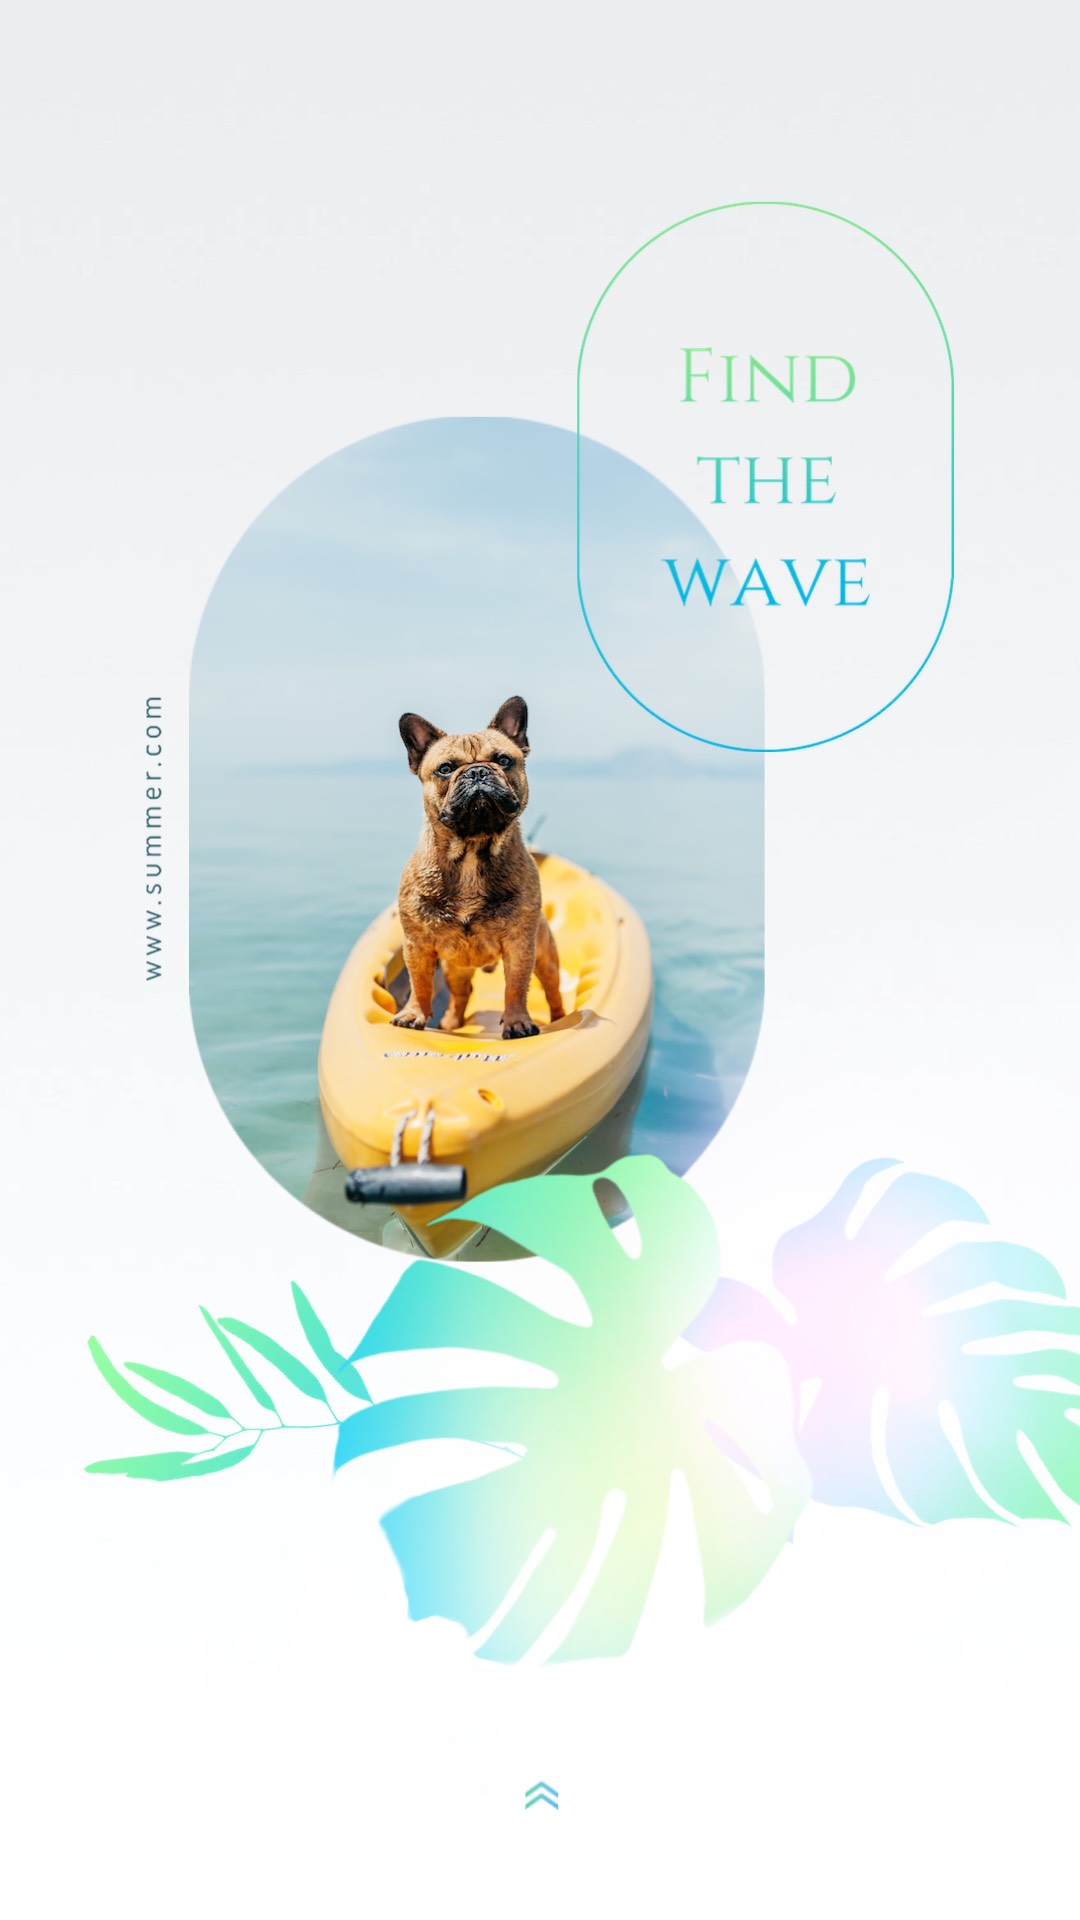 Find the wave! Dog surfing summer story template